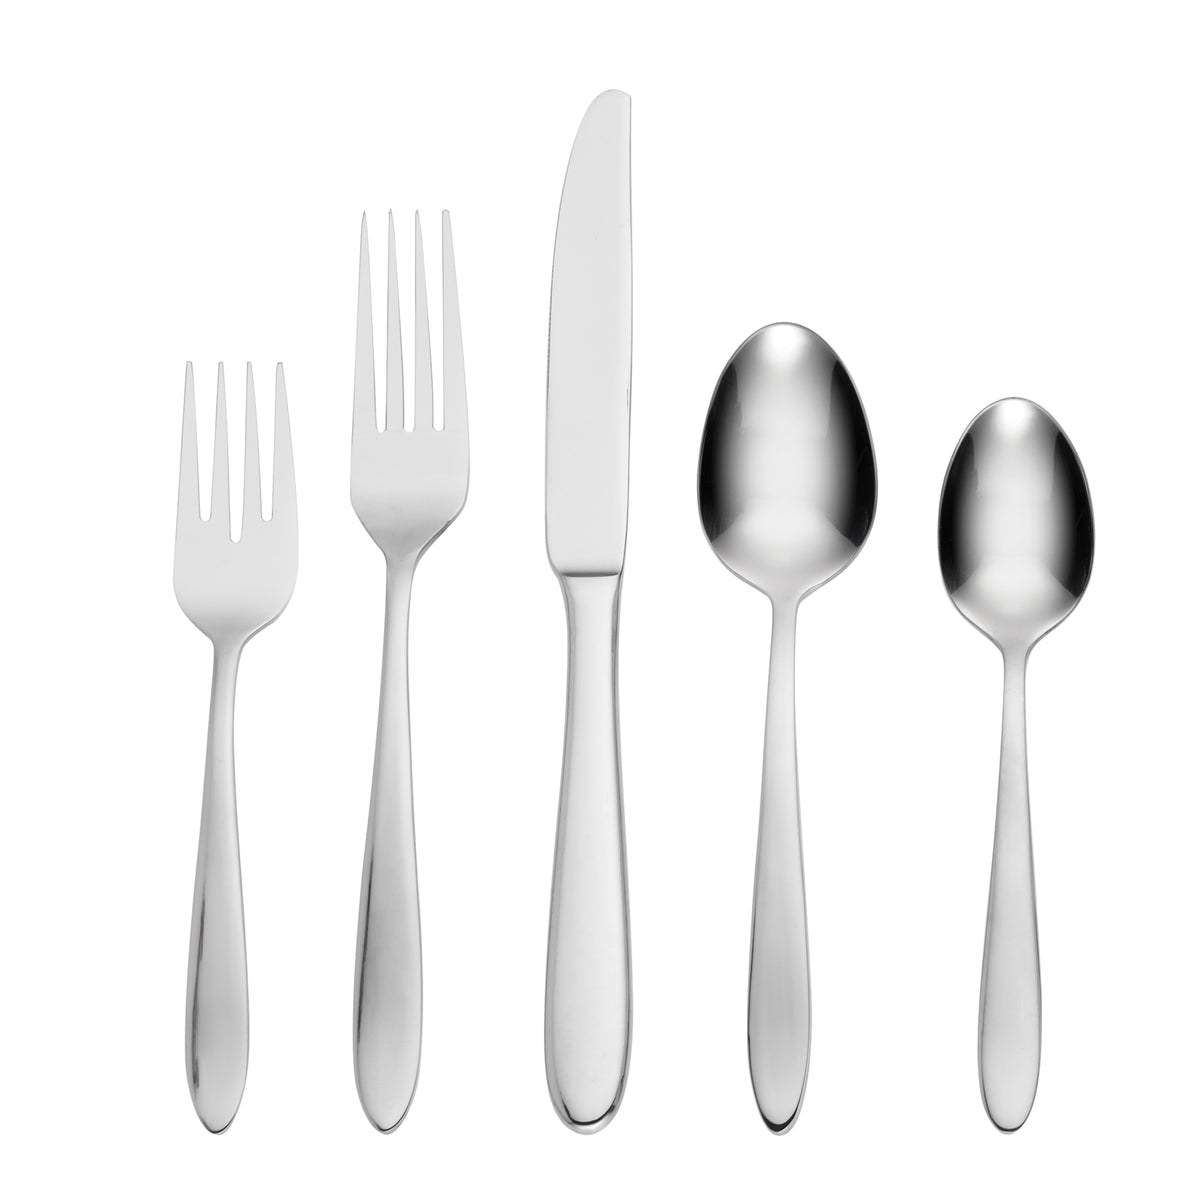 Different Grades of Stainless Steel - Lincoln House Cutlery